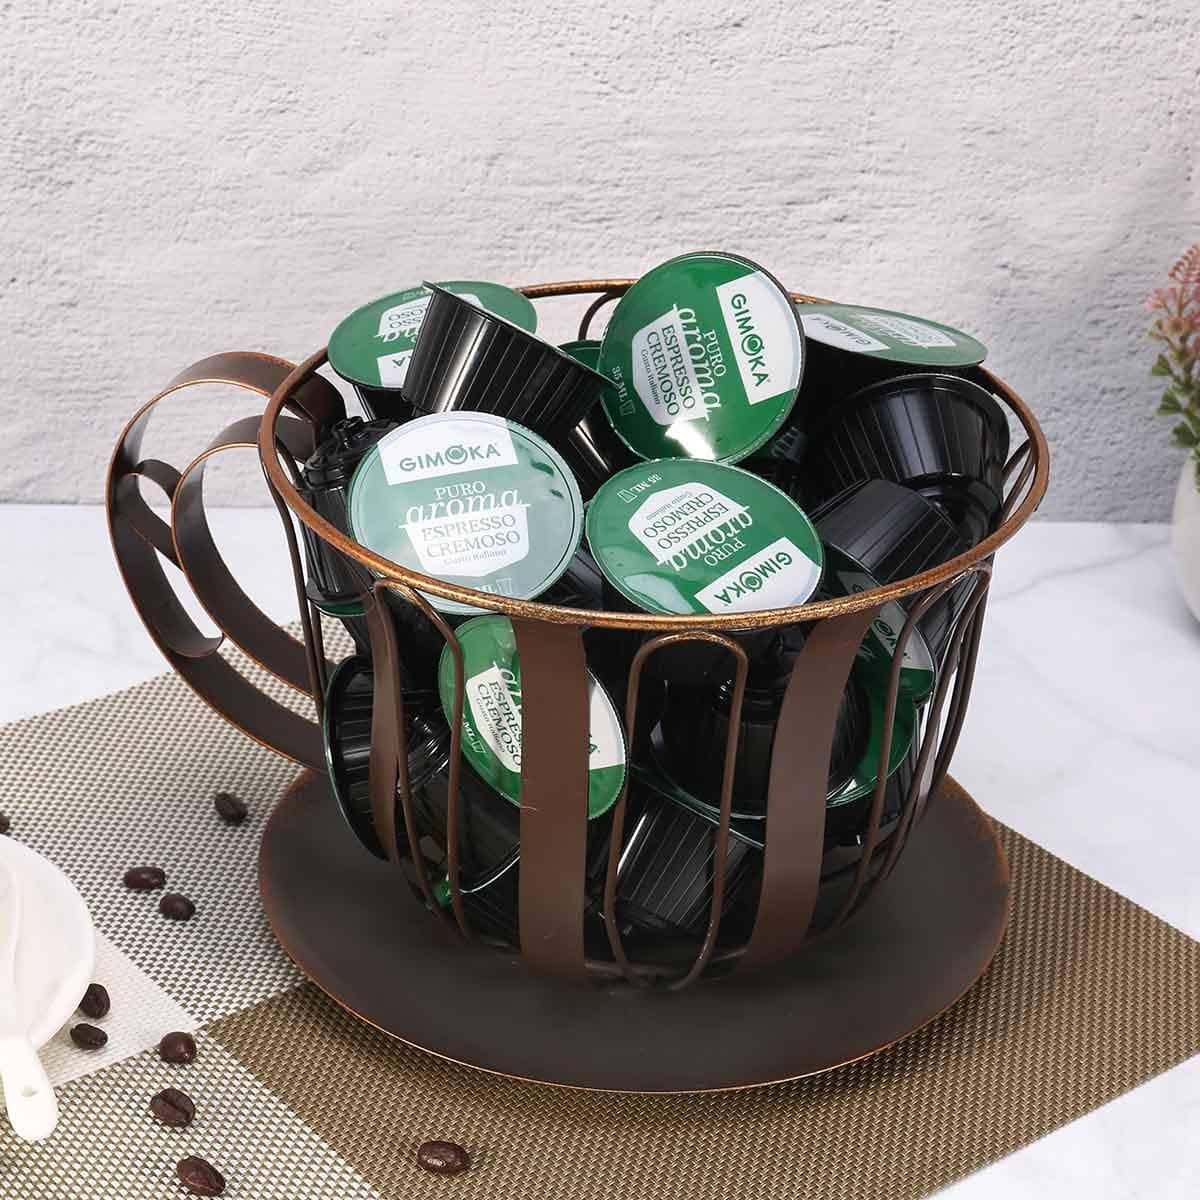 Coffee Pod Mug Storage Container - Organize Your Coffee Pods in Style